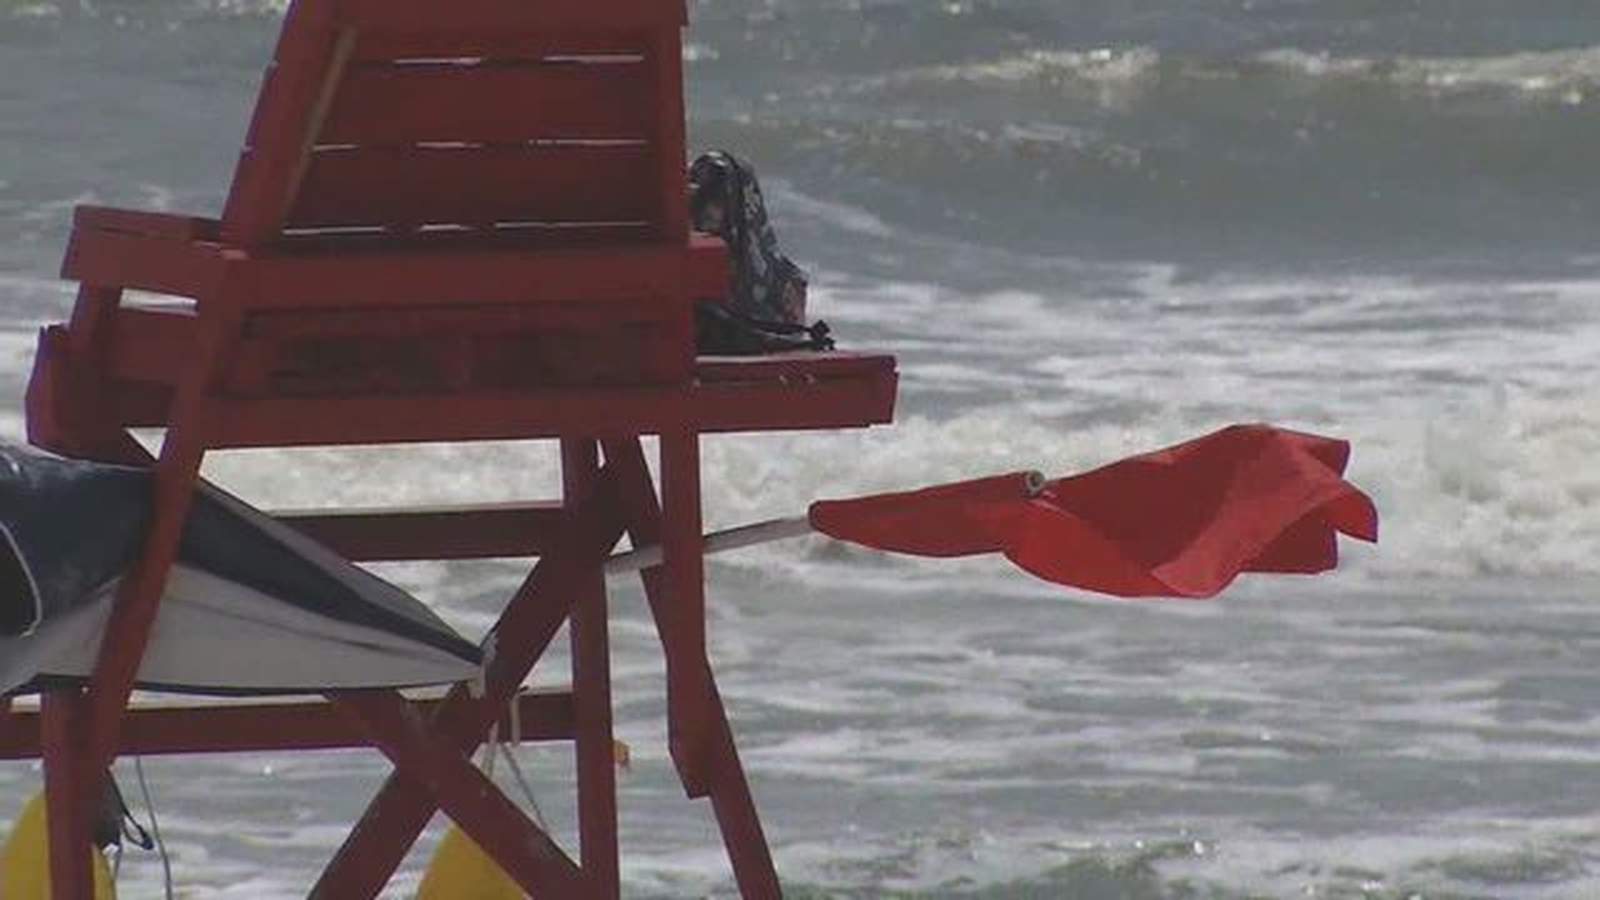 Lifeguards warn of strong rip currents this weekend